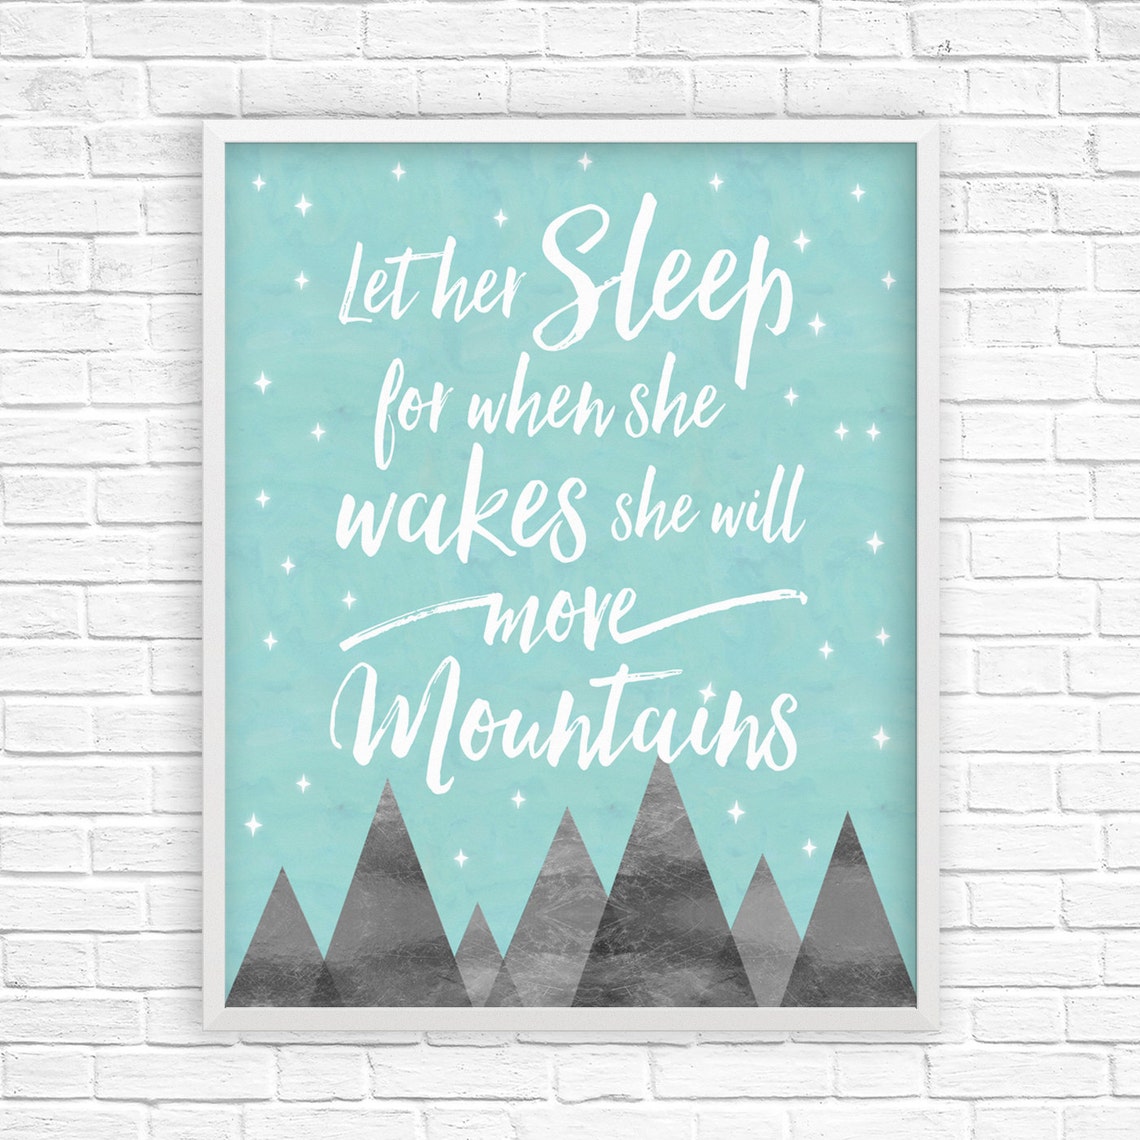 Let Her Sleep Printable Nursery Wall Art / Let Her Sleep For When She Wakes She Will Move Mountains Digital Print Poster for Baby/Child Room